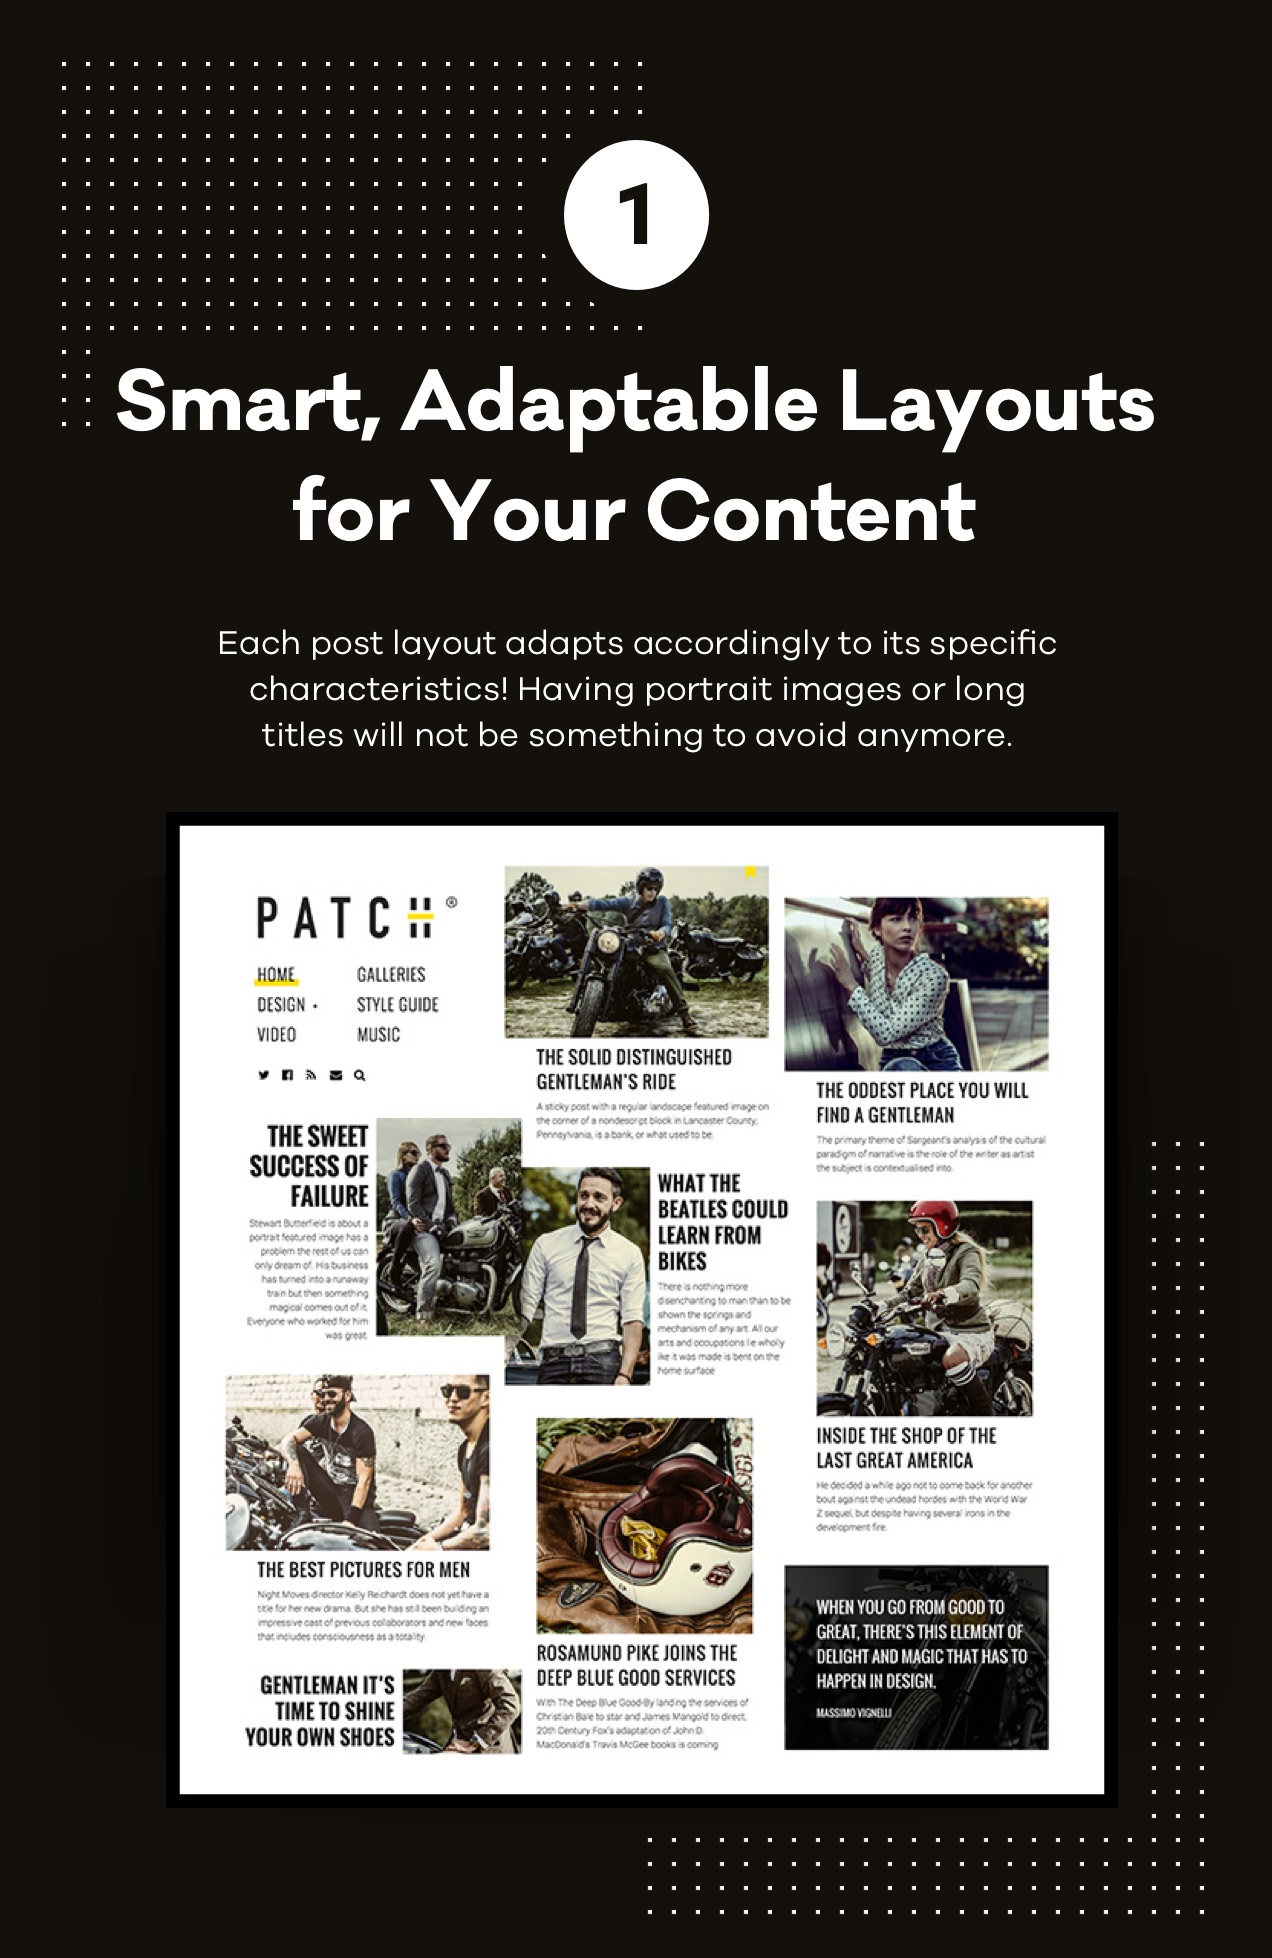 Smart, Adaptable Layouts for Your Content